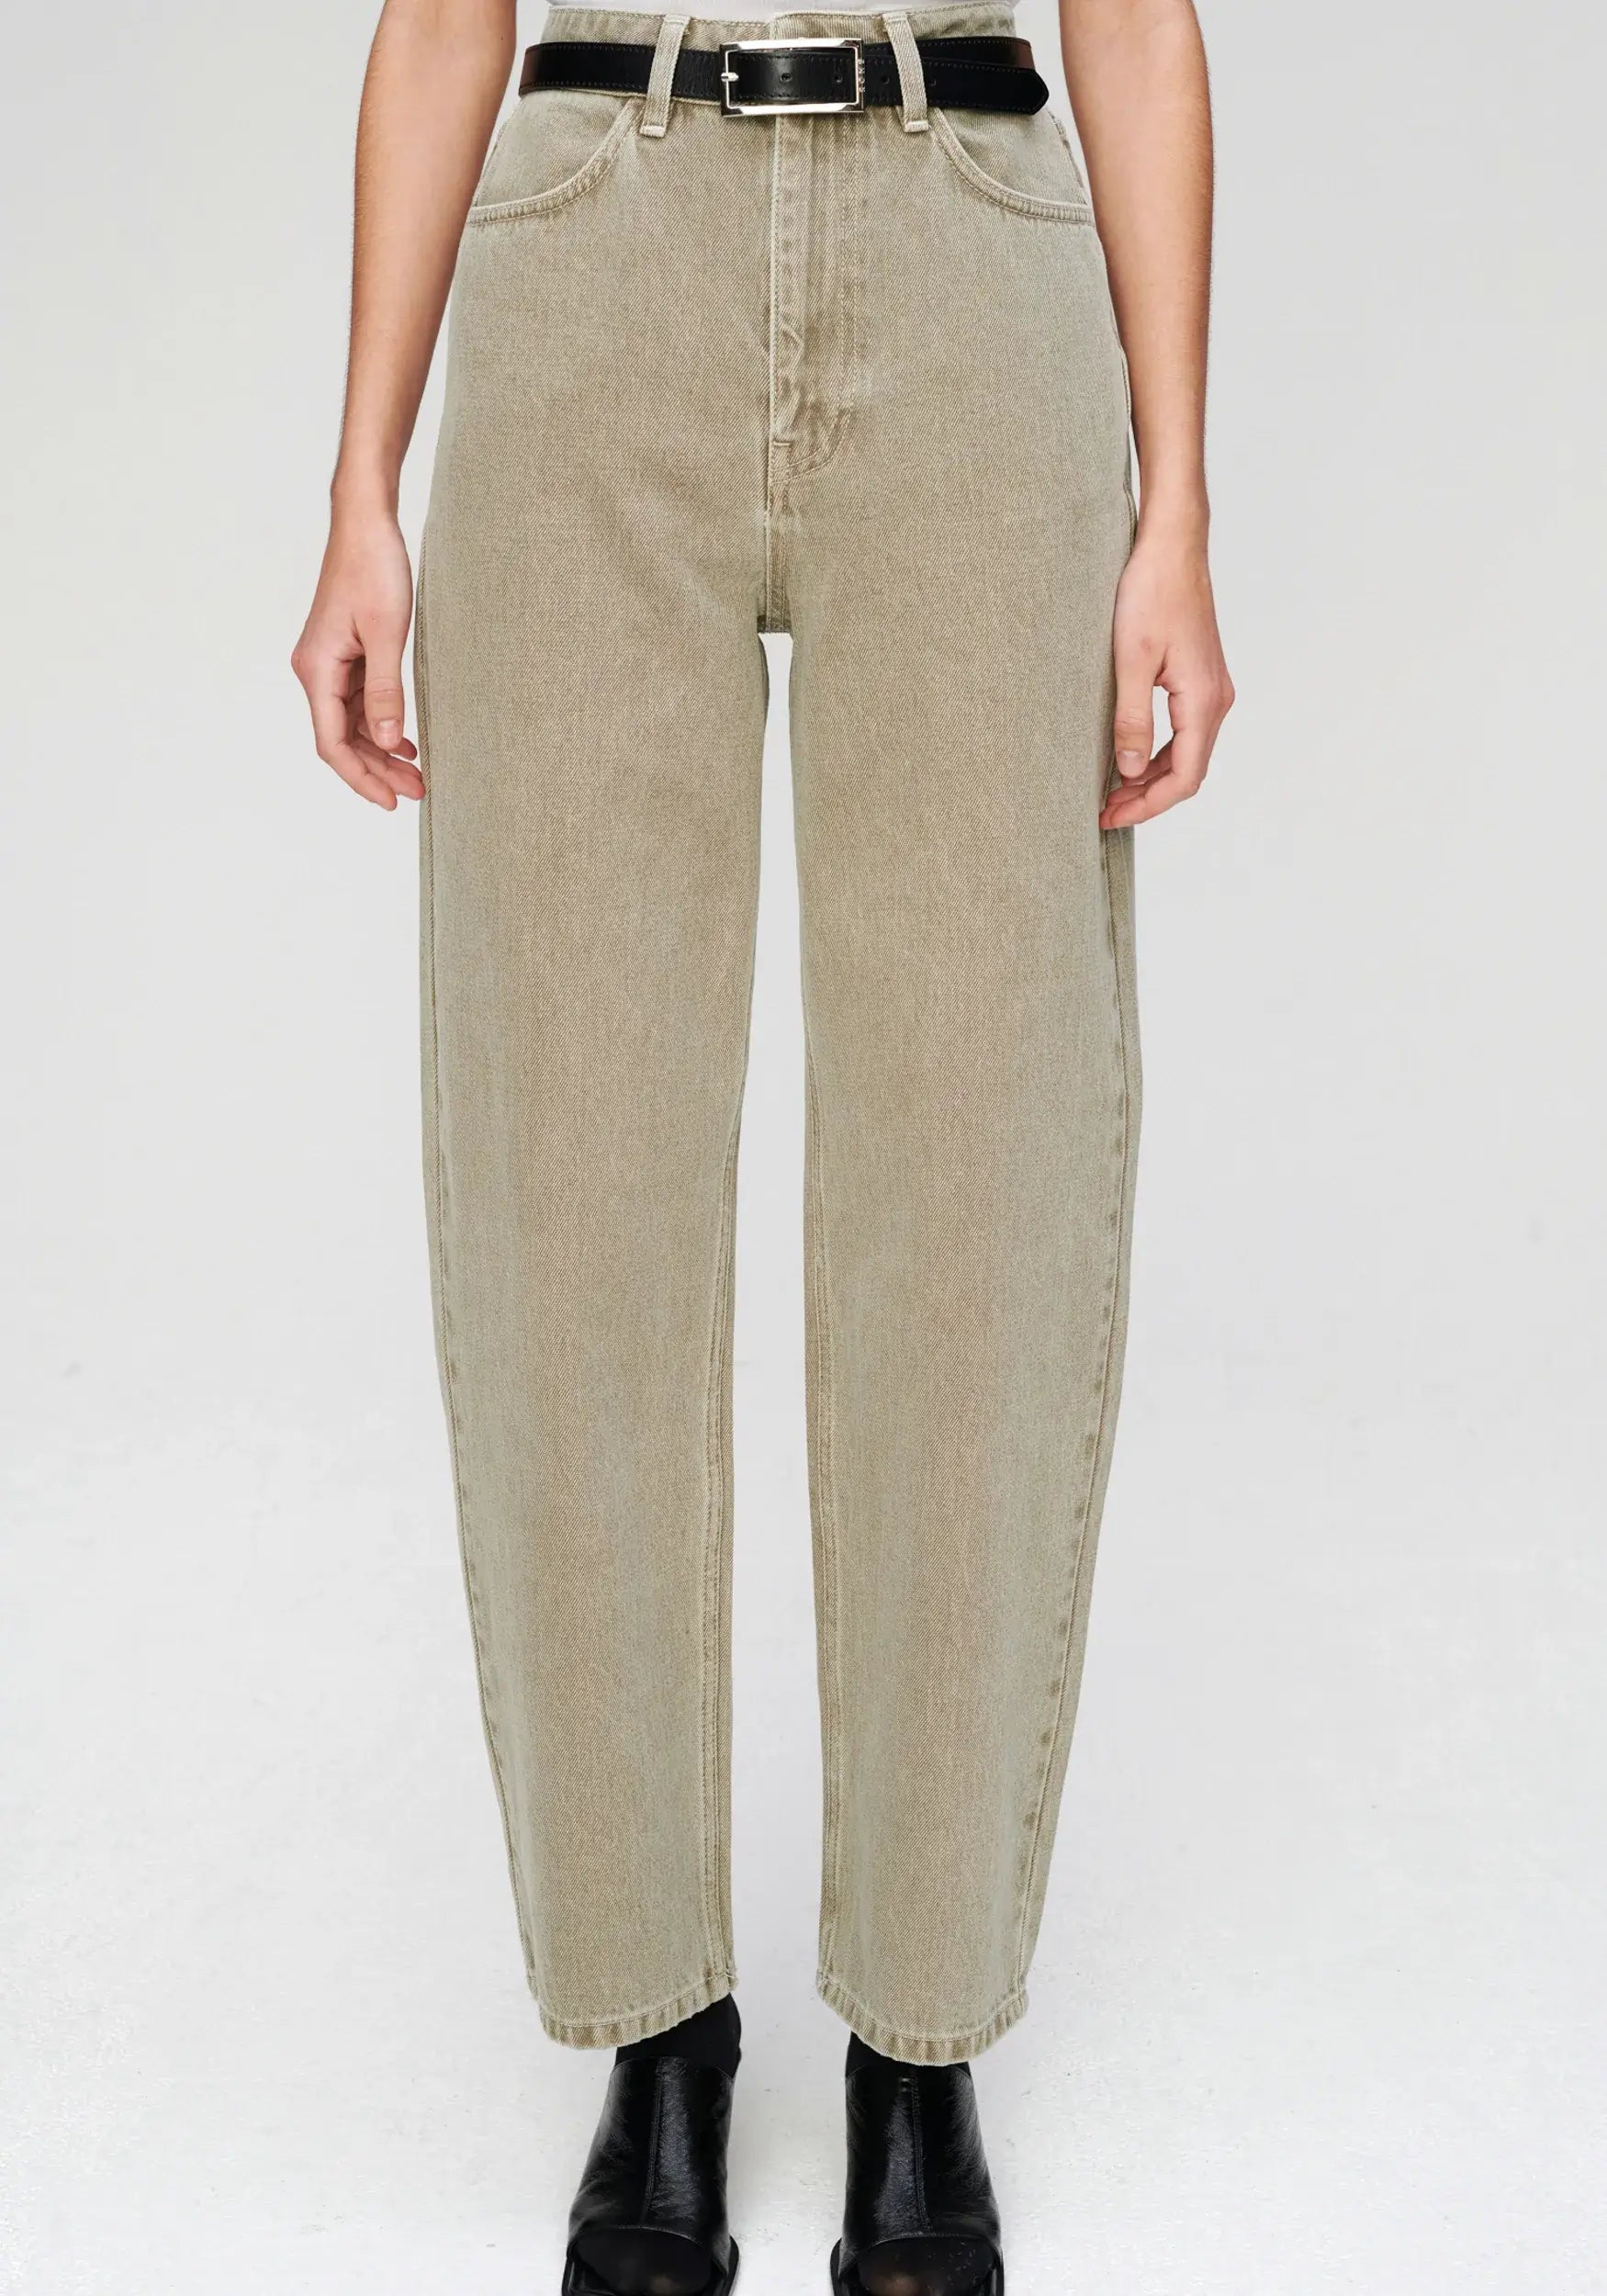 ROHE Dewi Denim in Pebbled Green from The New Trend